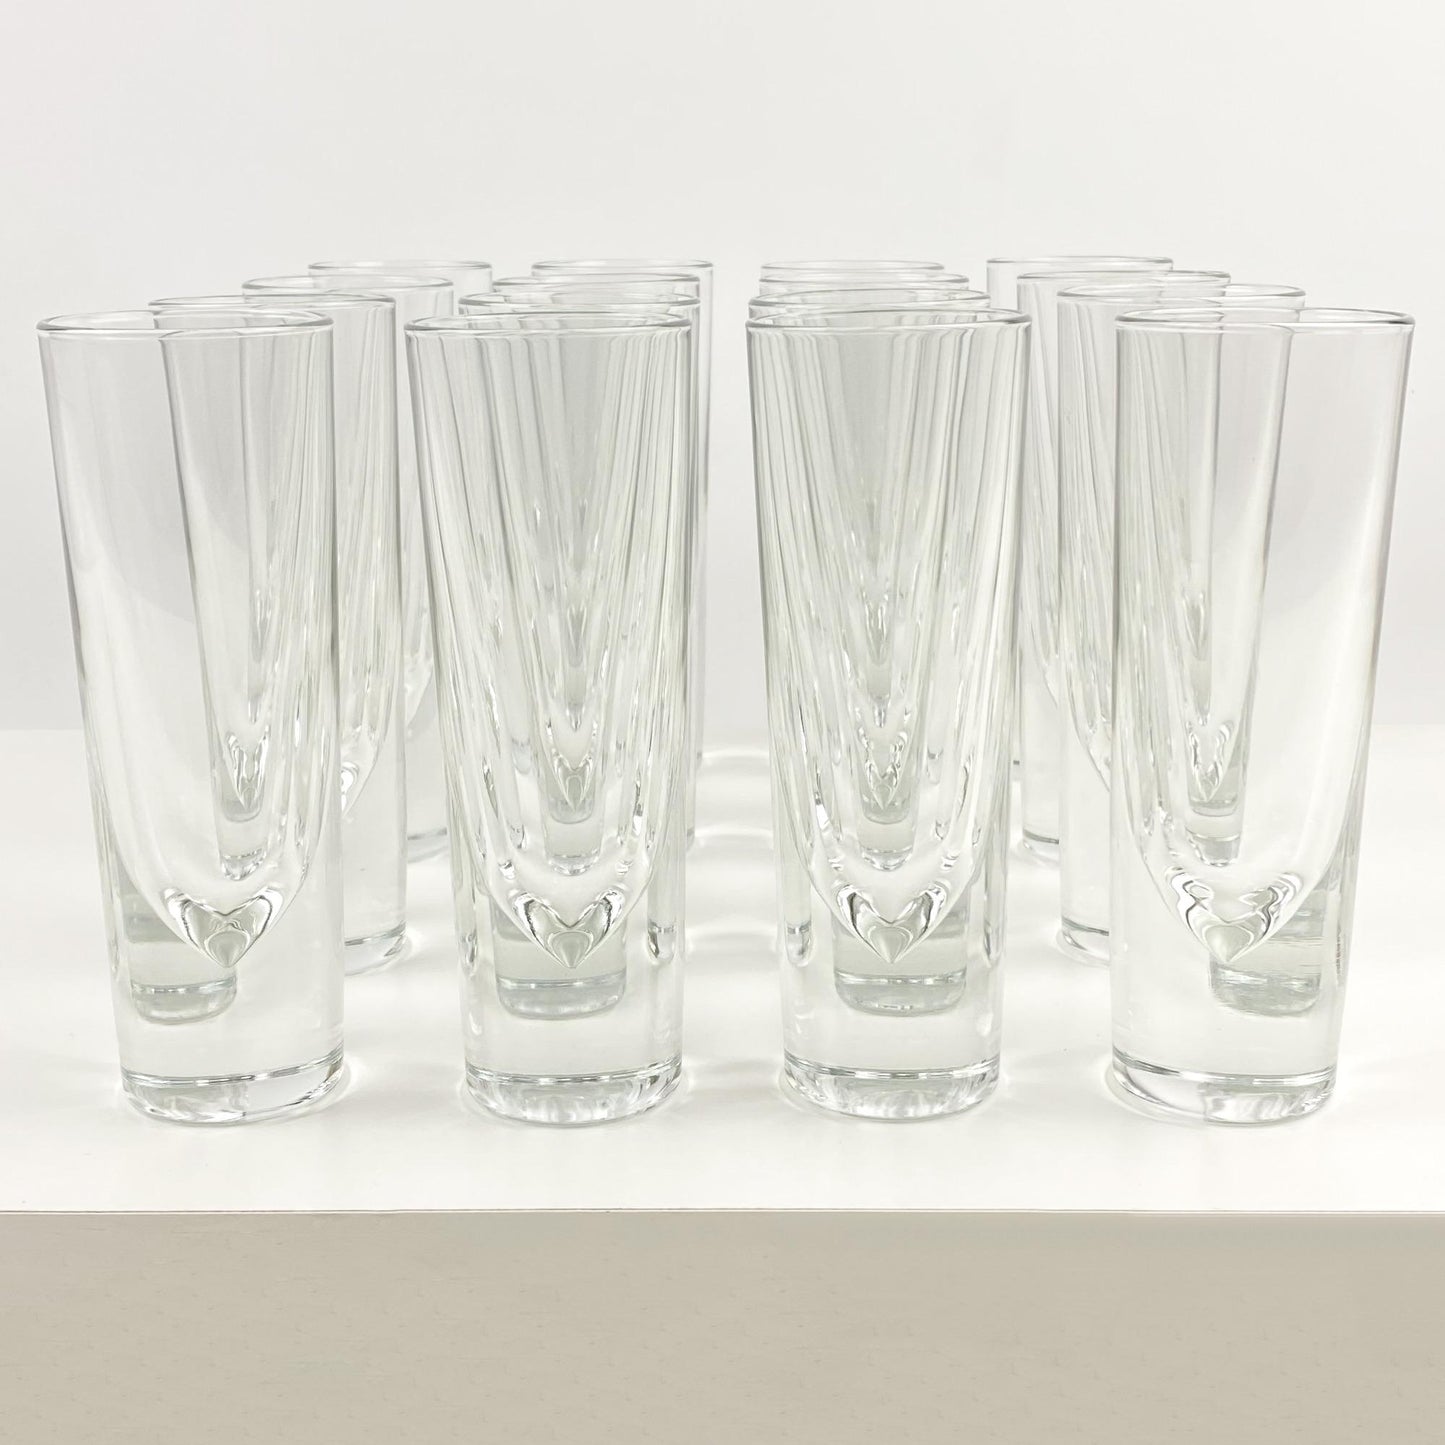 Carlo Moretti Attributed Stiletto Cocktail Glasses Made in Italy Set of 16